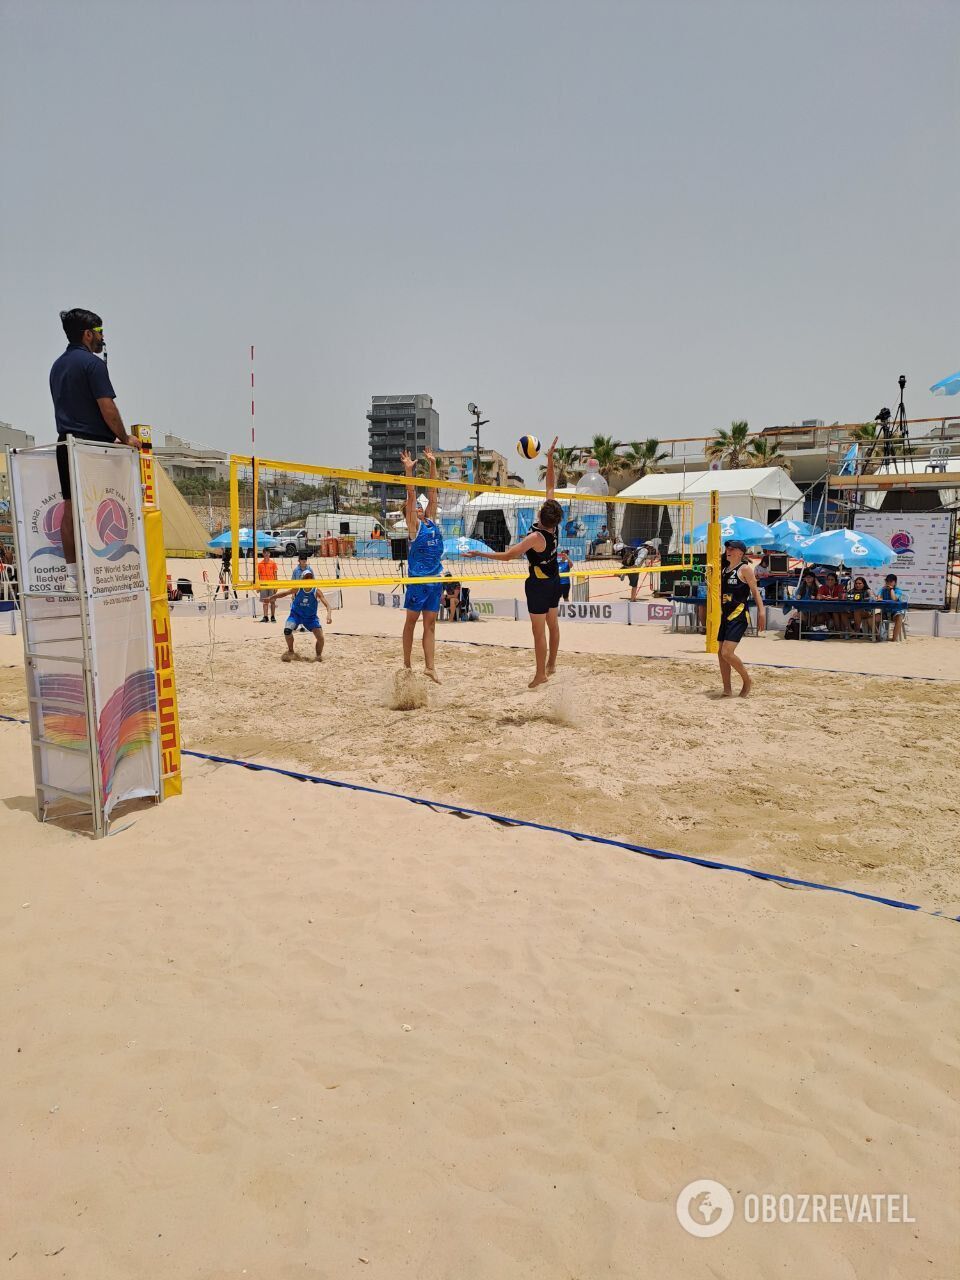 Triumph of Ukrainian students at the World Beach Volleyball Championships